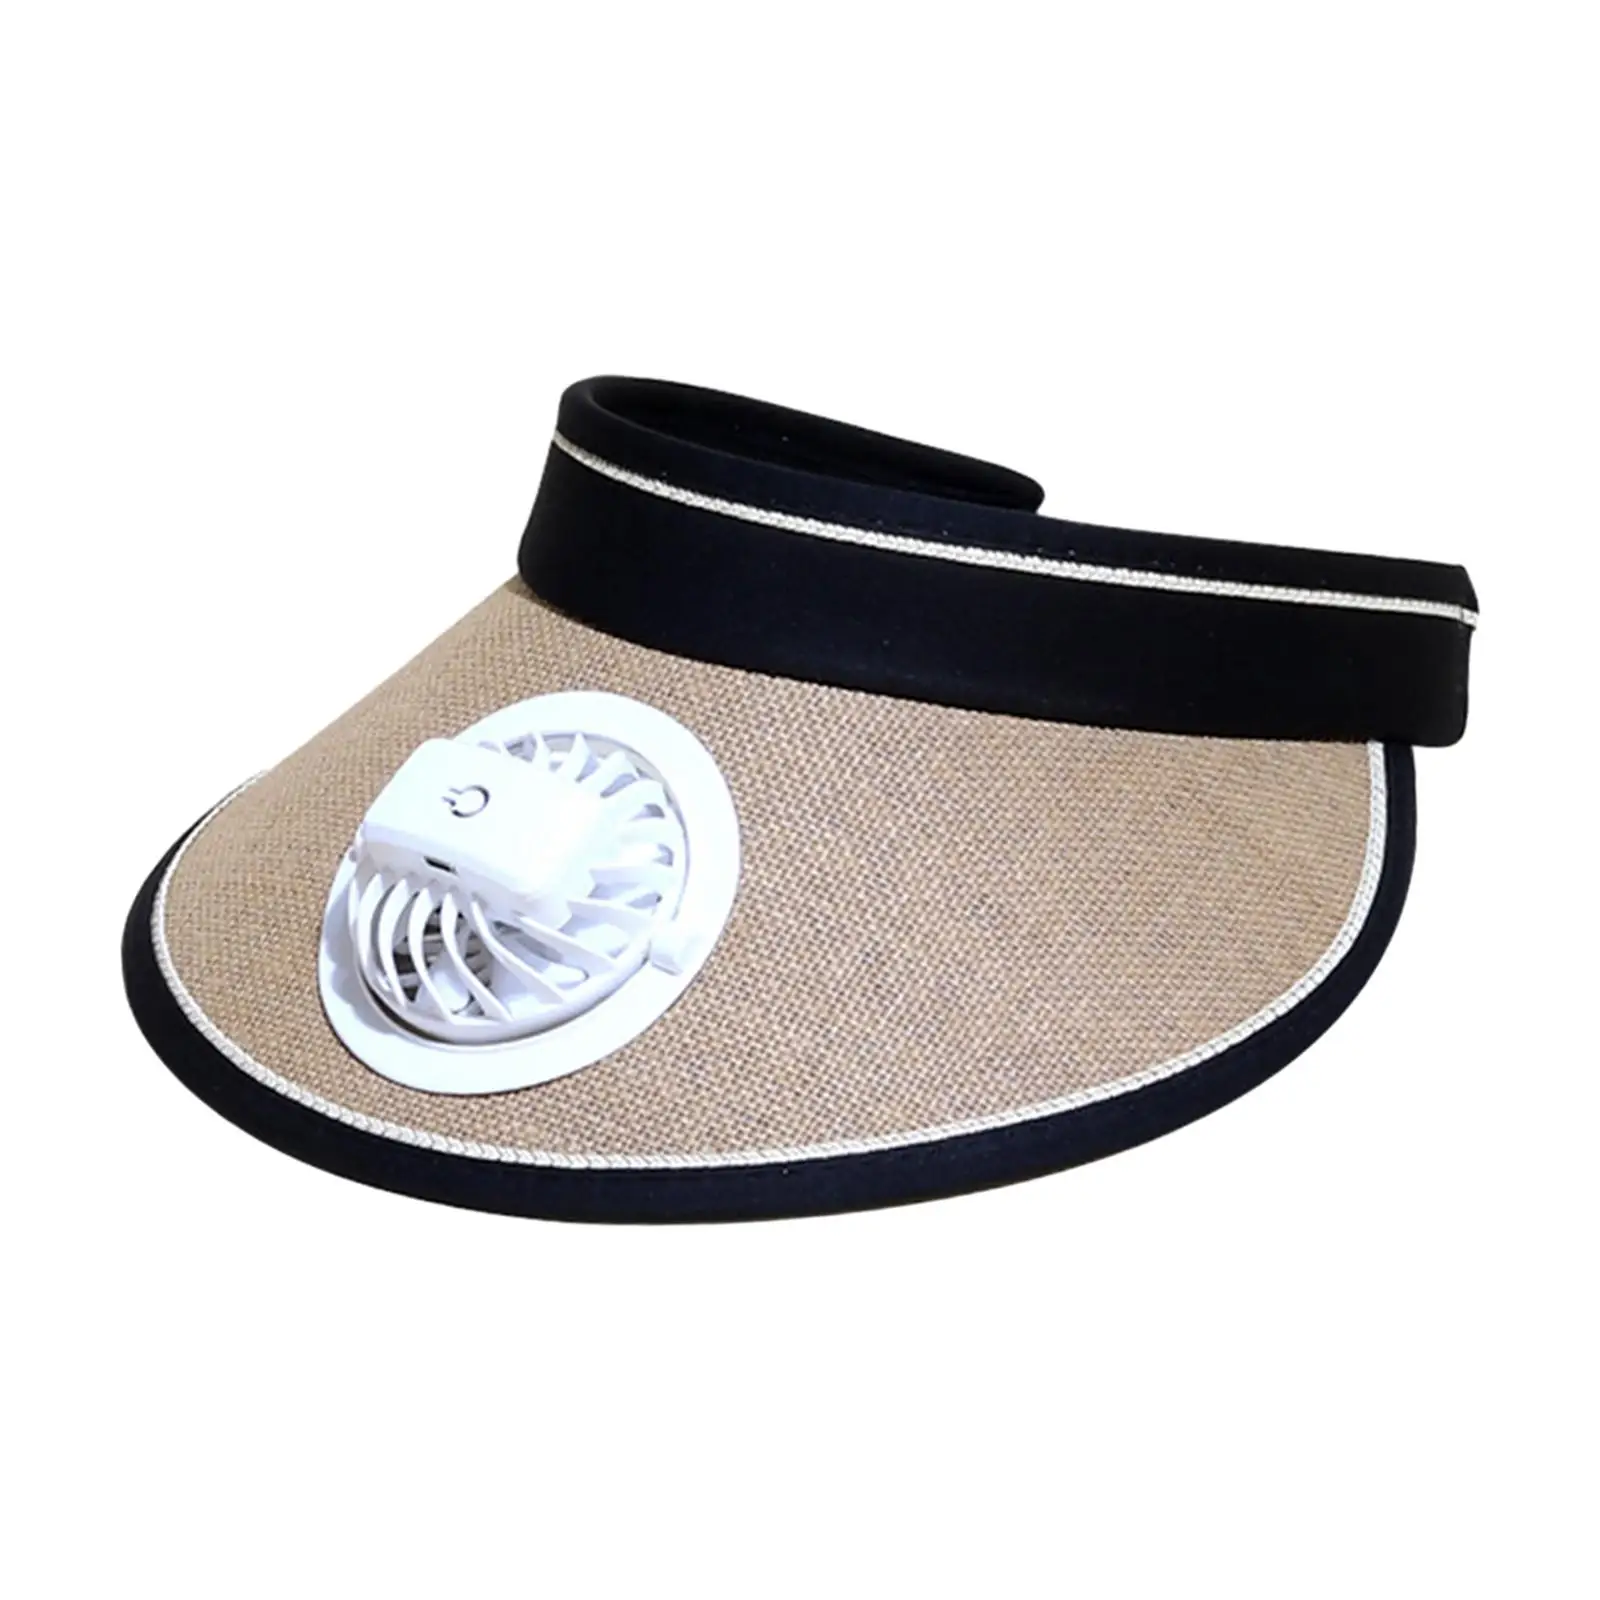 Women Sun Visor Hat with USB Fan Large Brim Multifunctional Adjustable Elastic Buckle Fishing Hat for Casual Everyday Wear